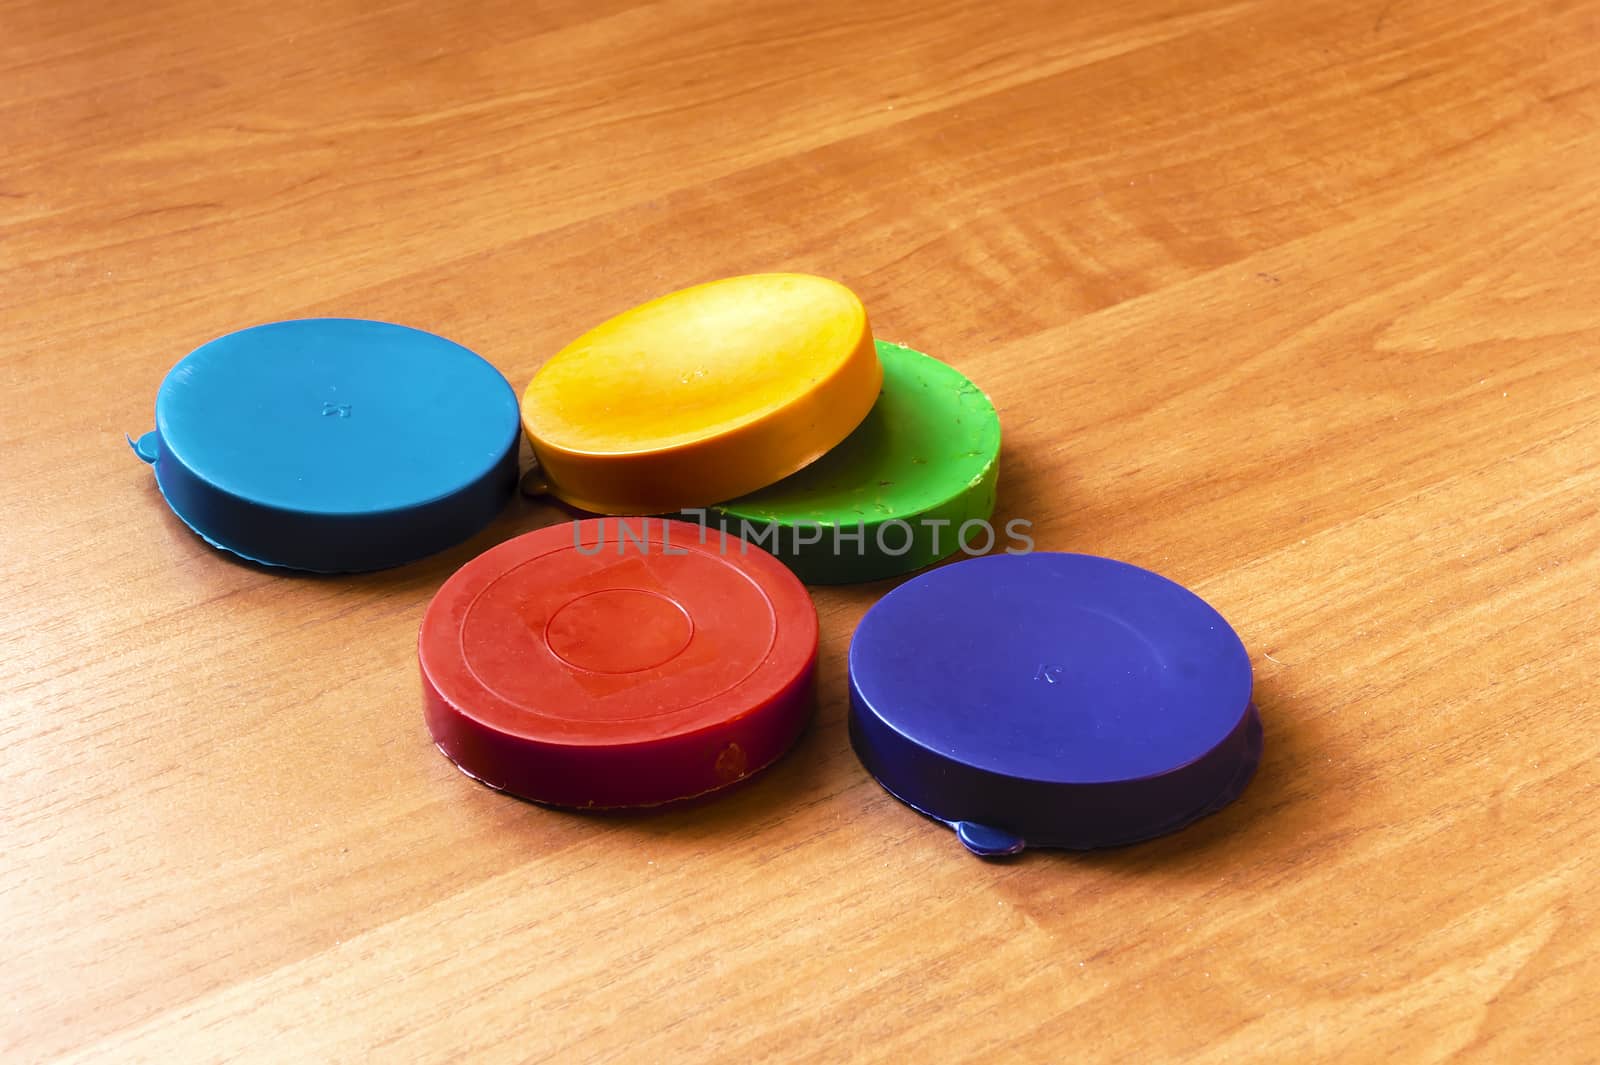 Plastic lids for cans lie on the board